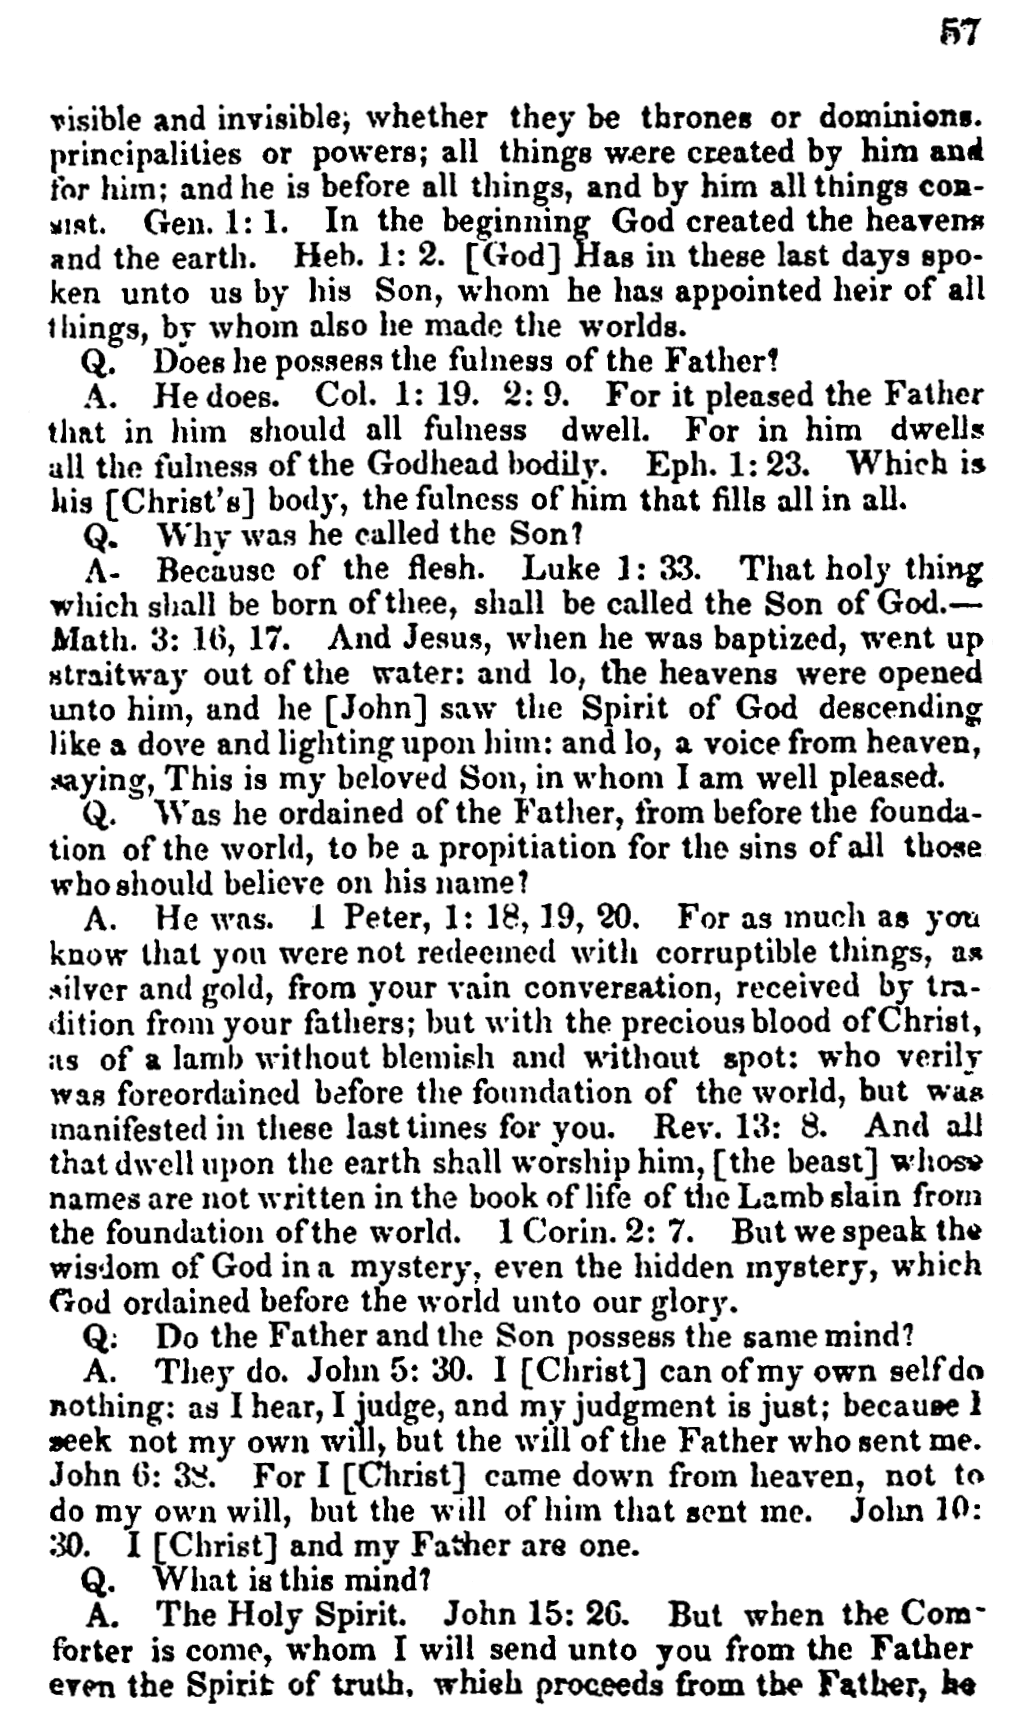 1835 Doctrine & Covenants - Lectures on Faith, p. 57